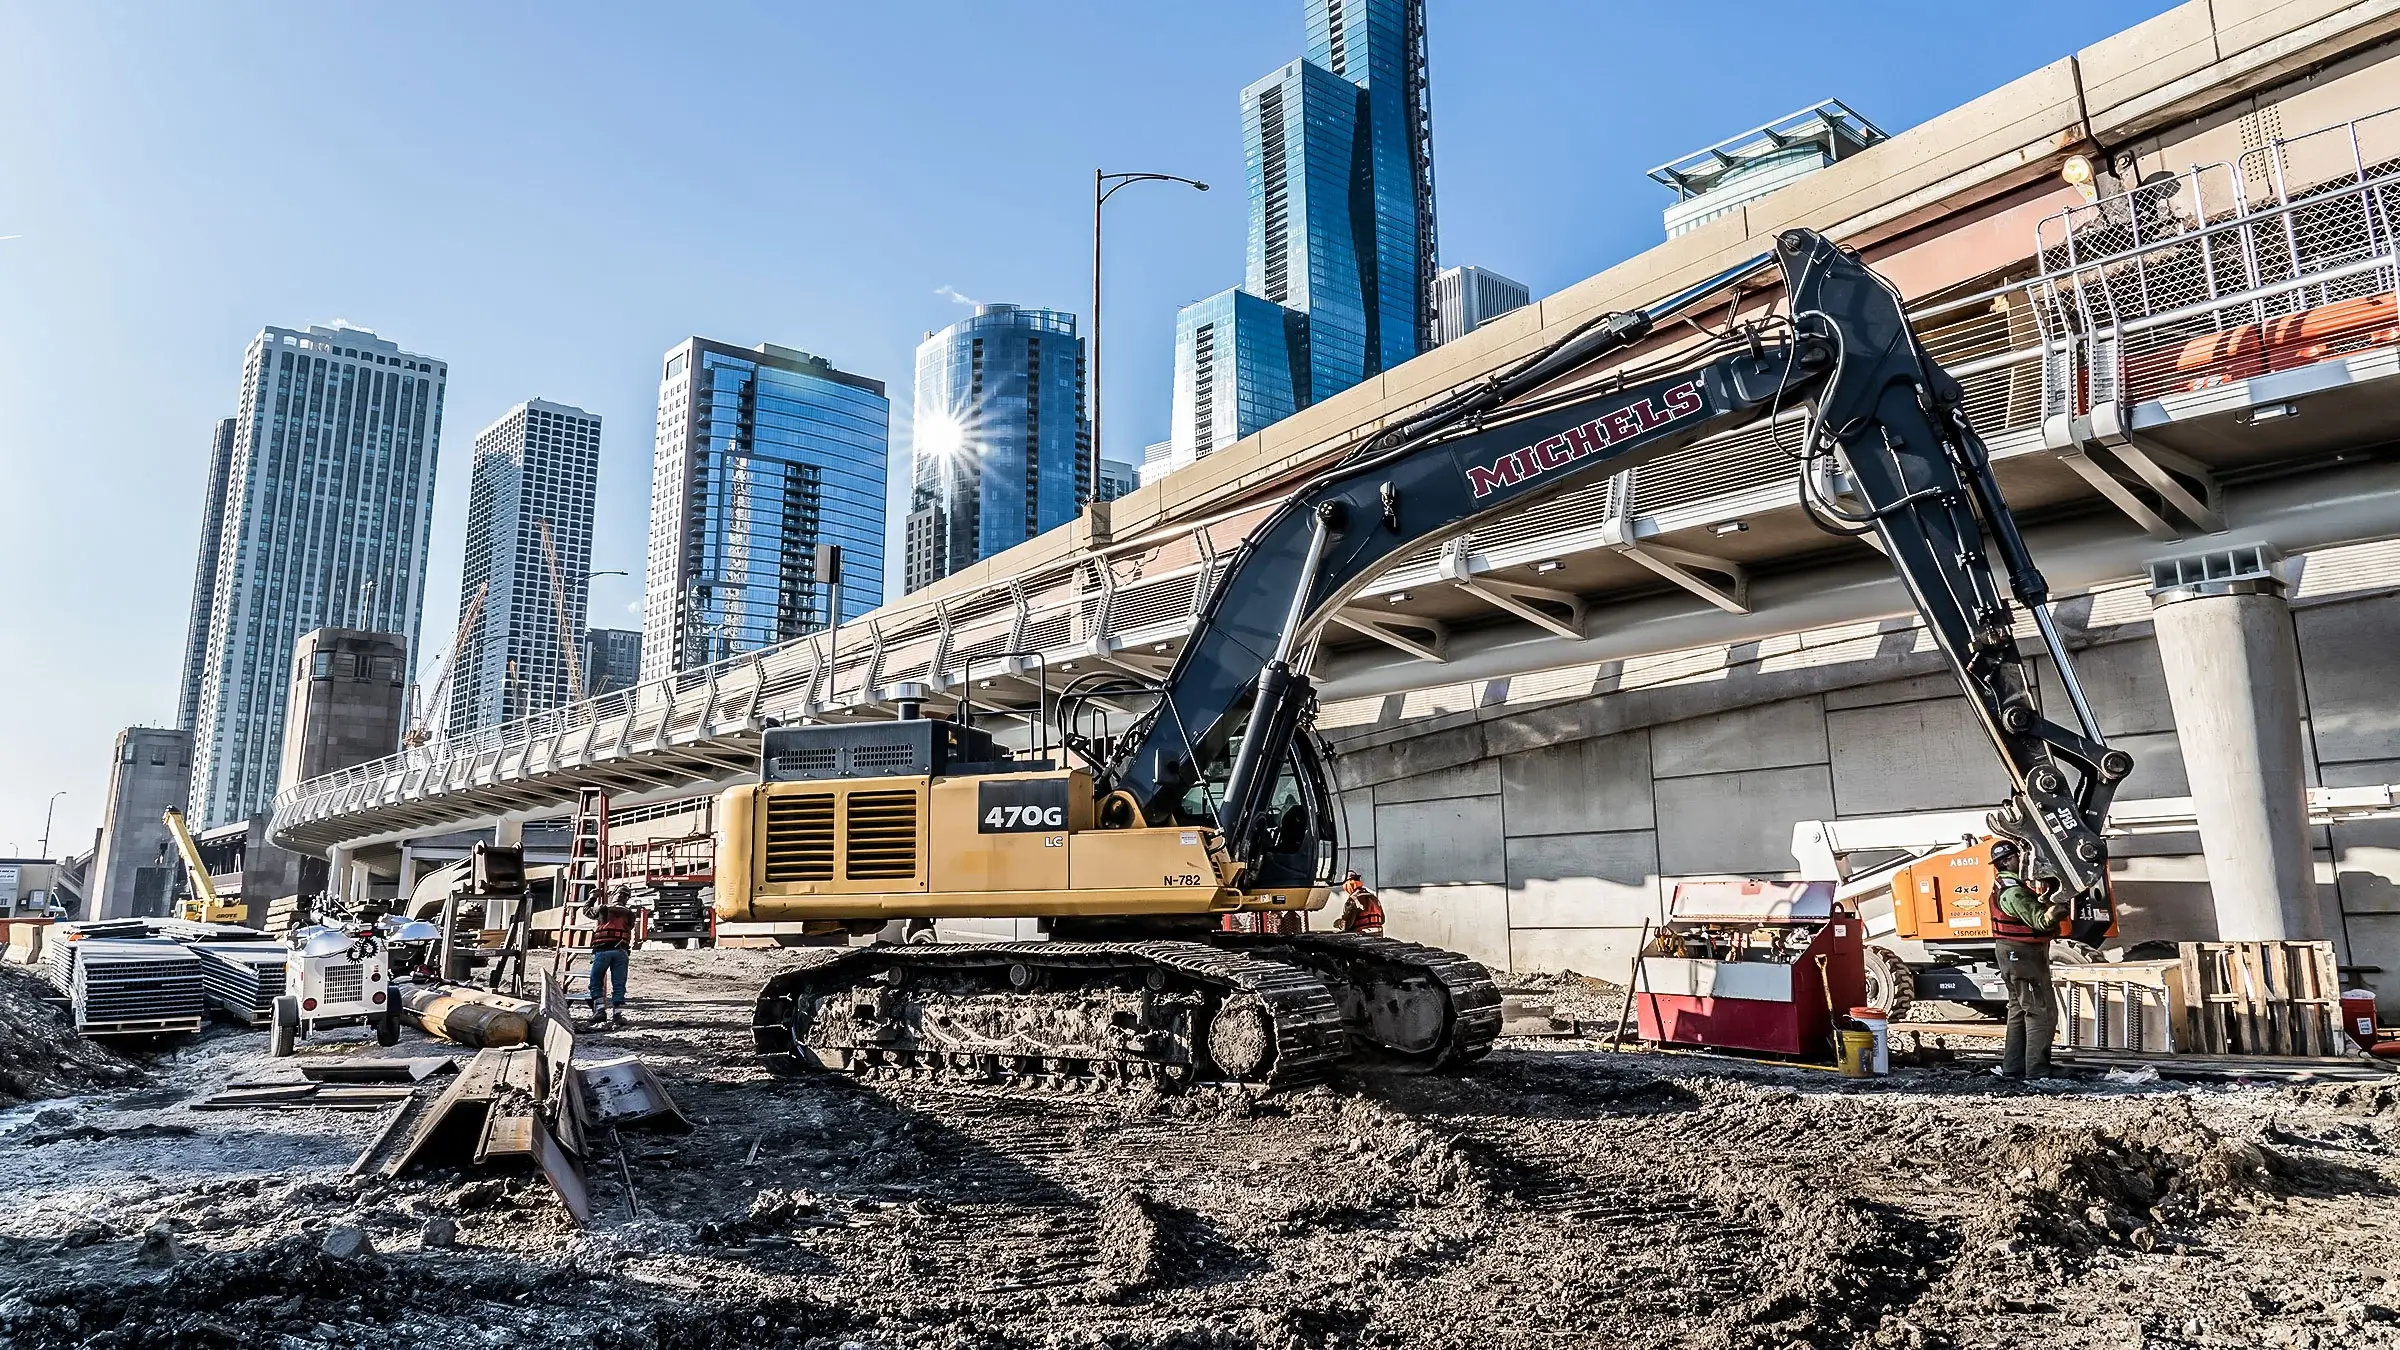 A Michels excavtor near a Chicago bridge and skyscrapers